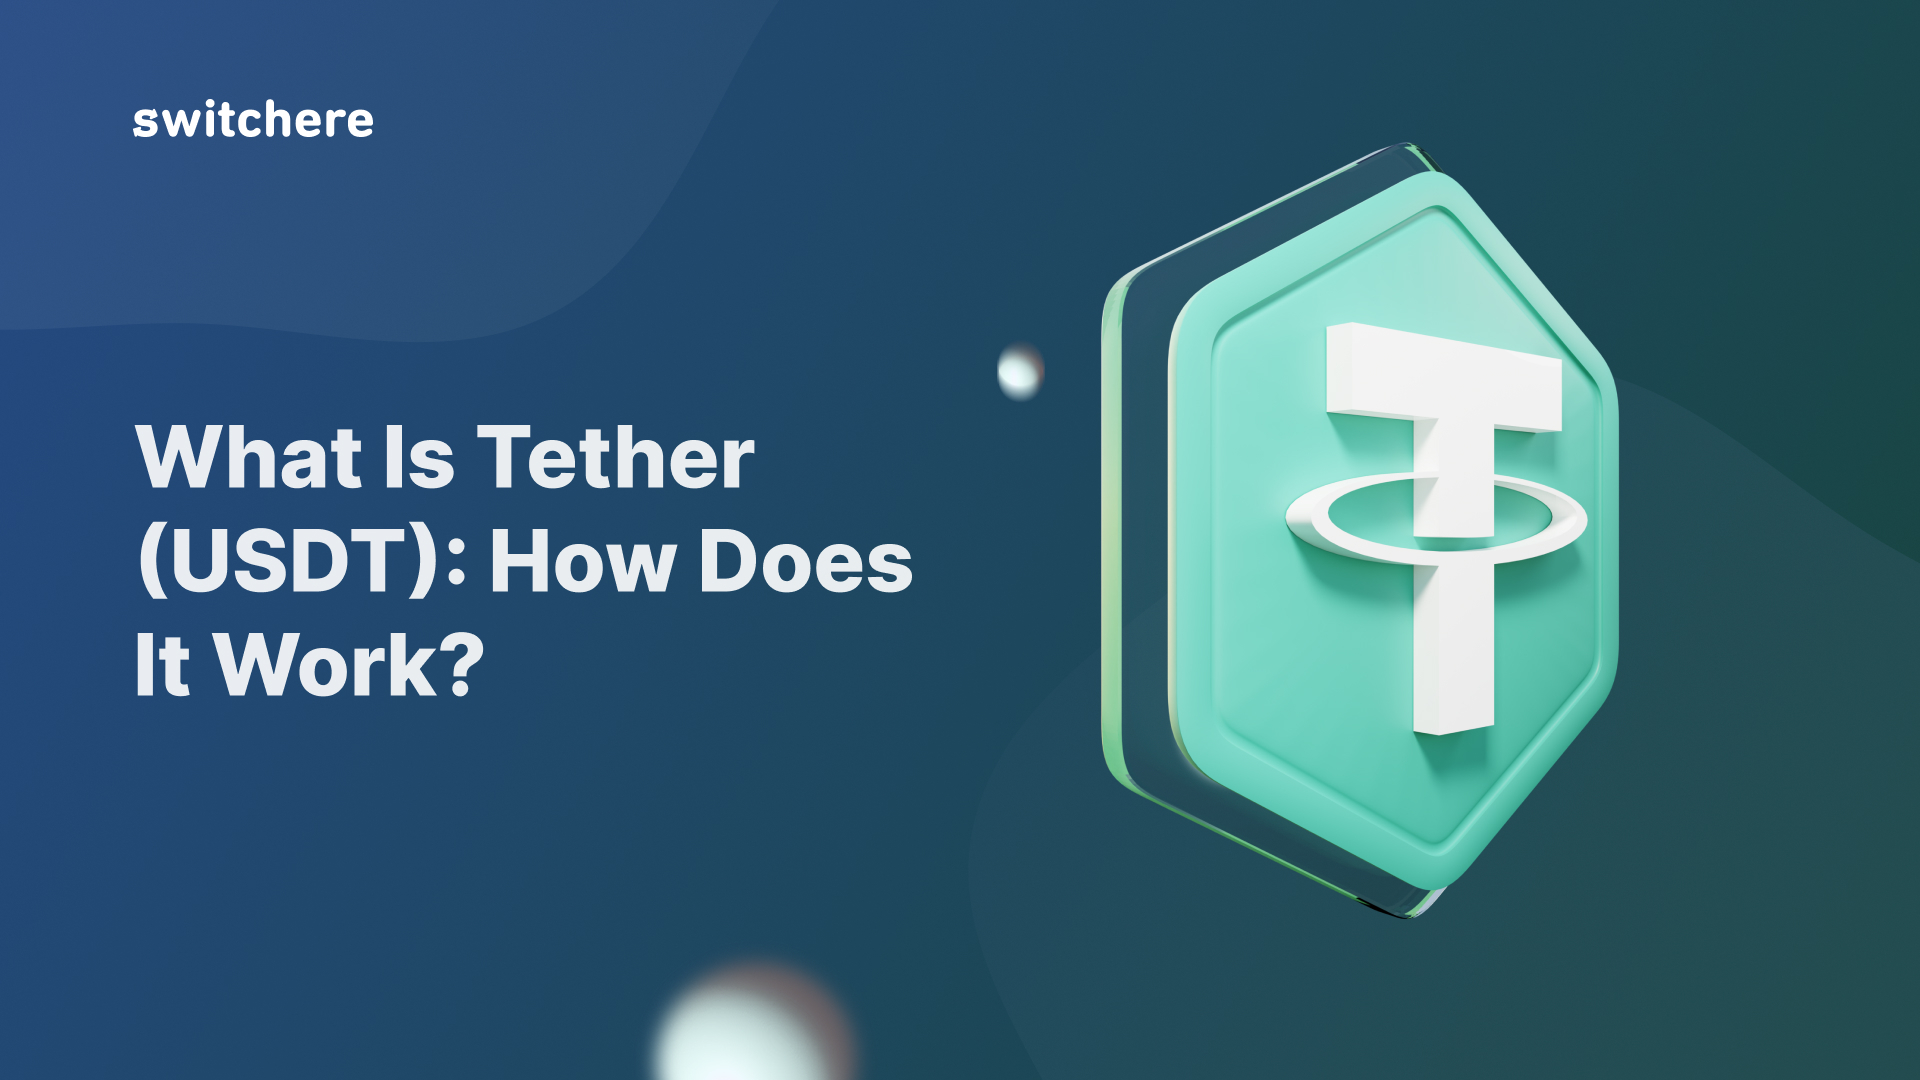 What Is Tether (USDT): How Does It Work?